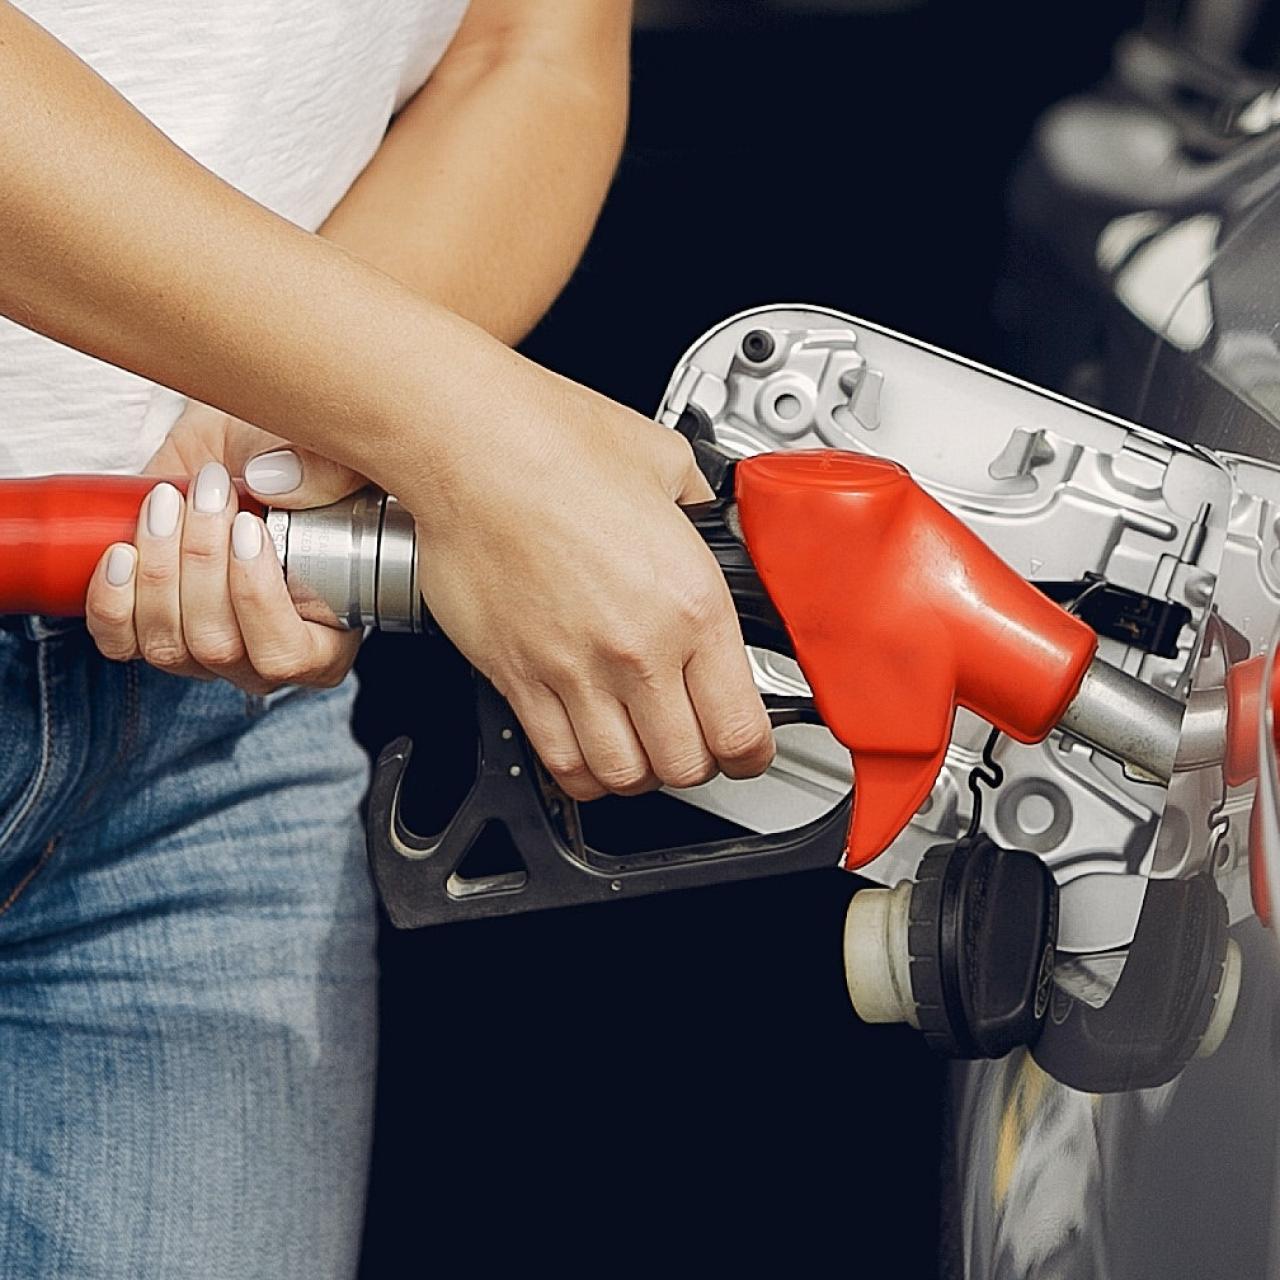 Driving tips that can cut your fuel use 